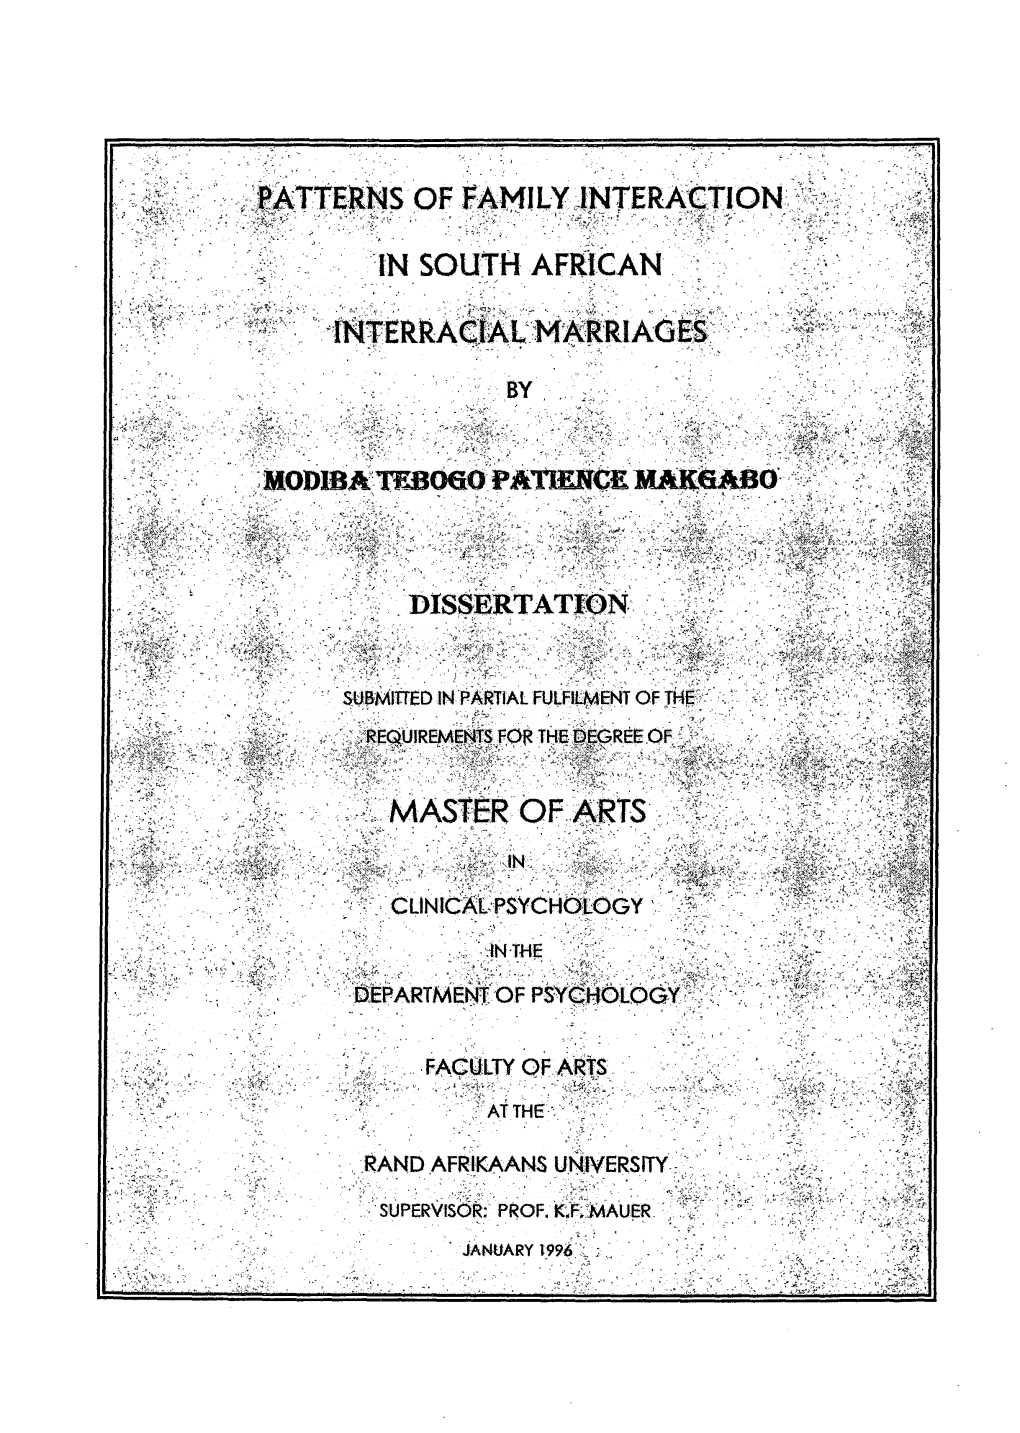 Patterns of Family Interaction in South African Interracial Marriages